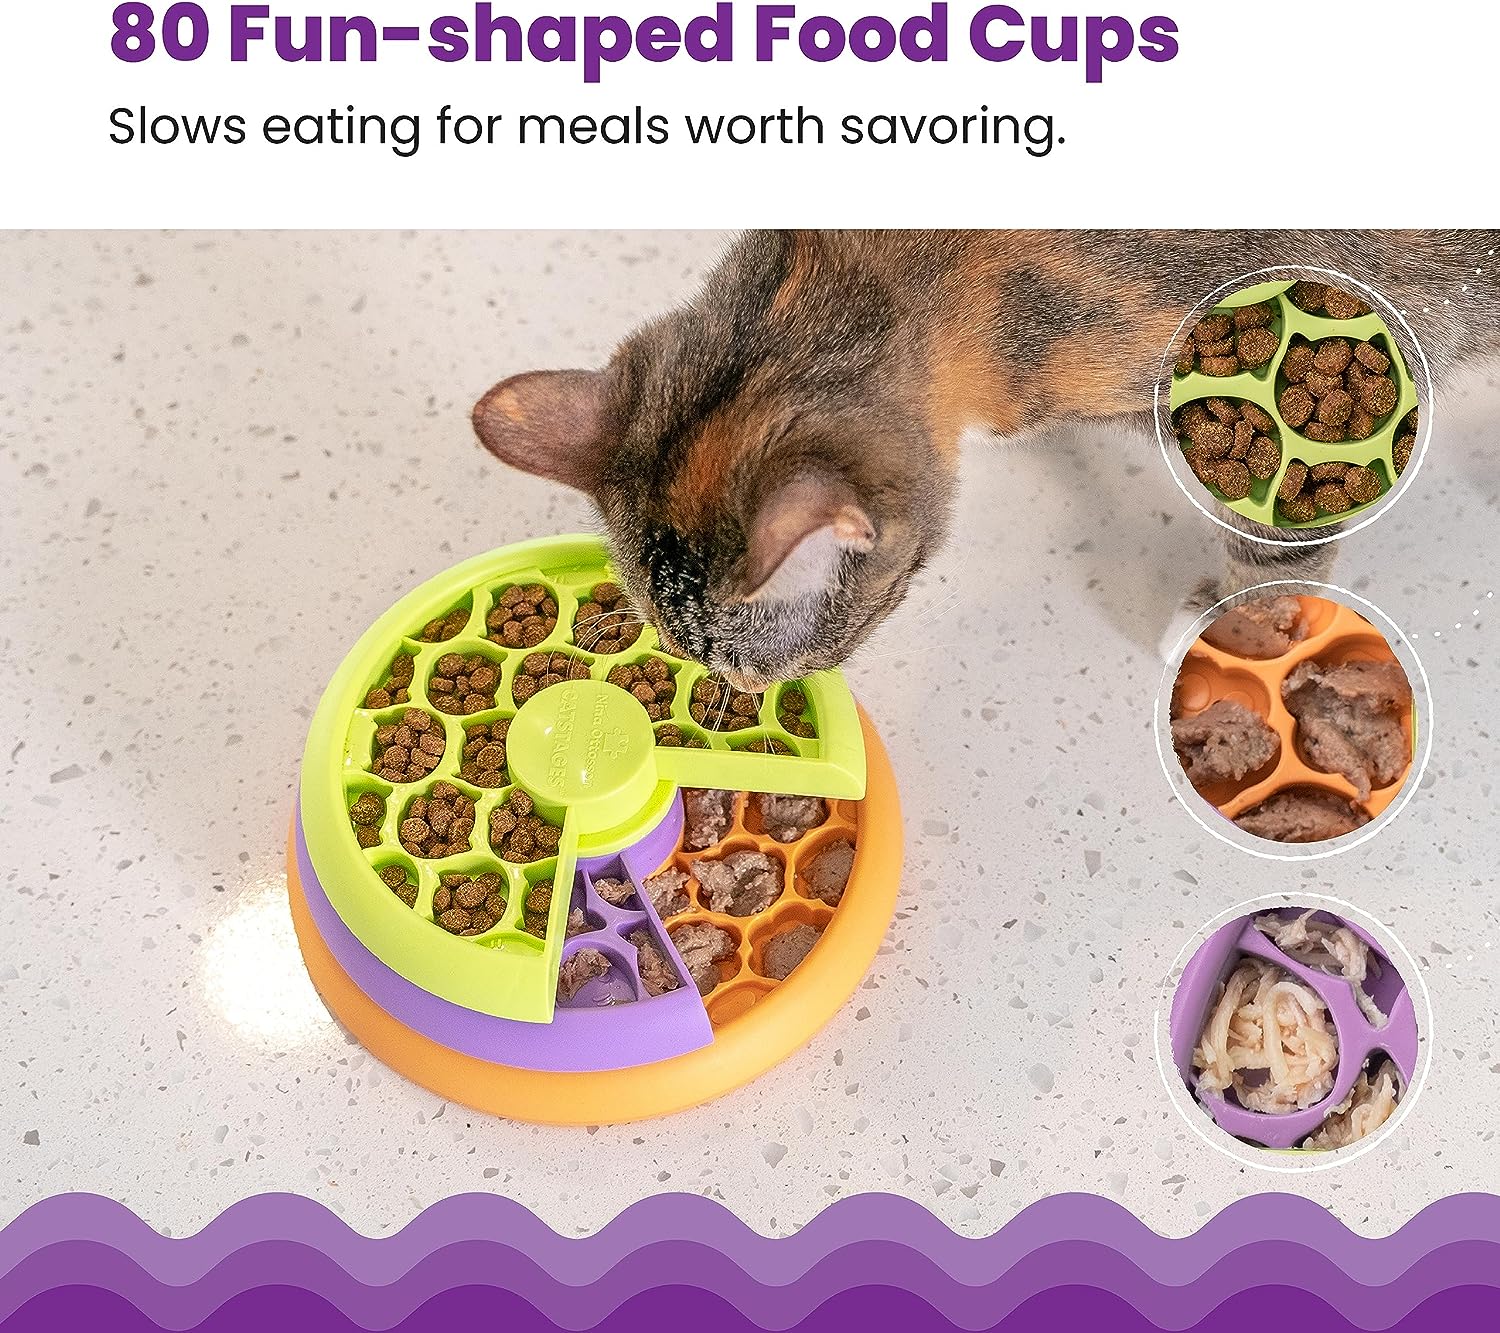 Using Food Puzzles with Your Cats - Fundamentally Feline